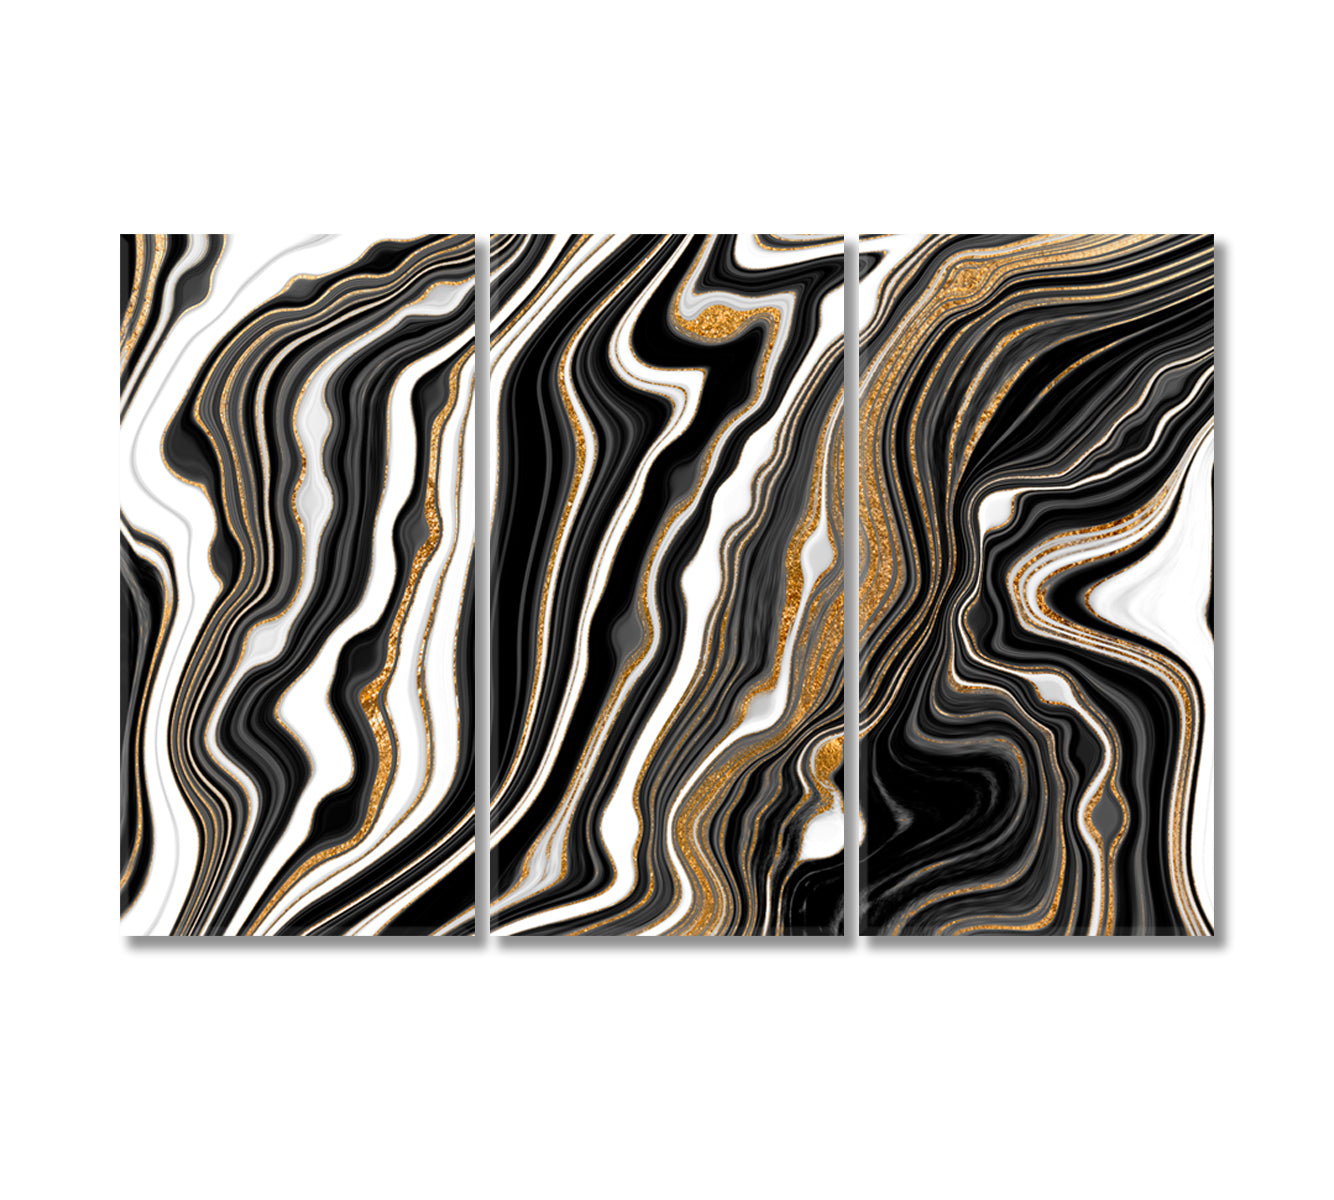 Abstract Black and White Agate Canvas Print-Canvas Print-CetArt-3 Panels-36x24 inches-CetArt